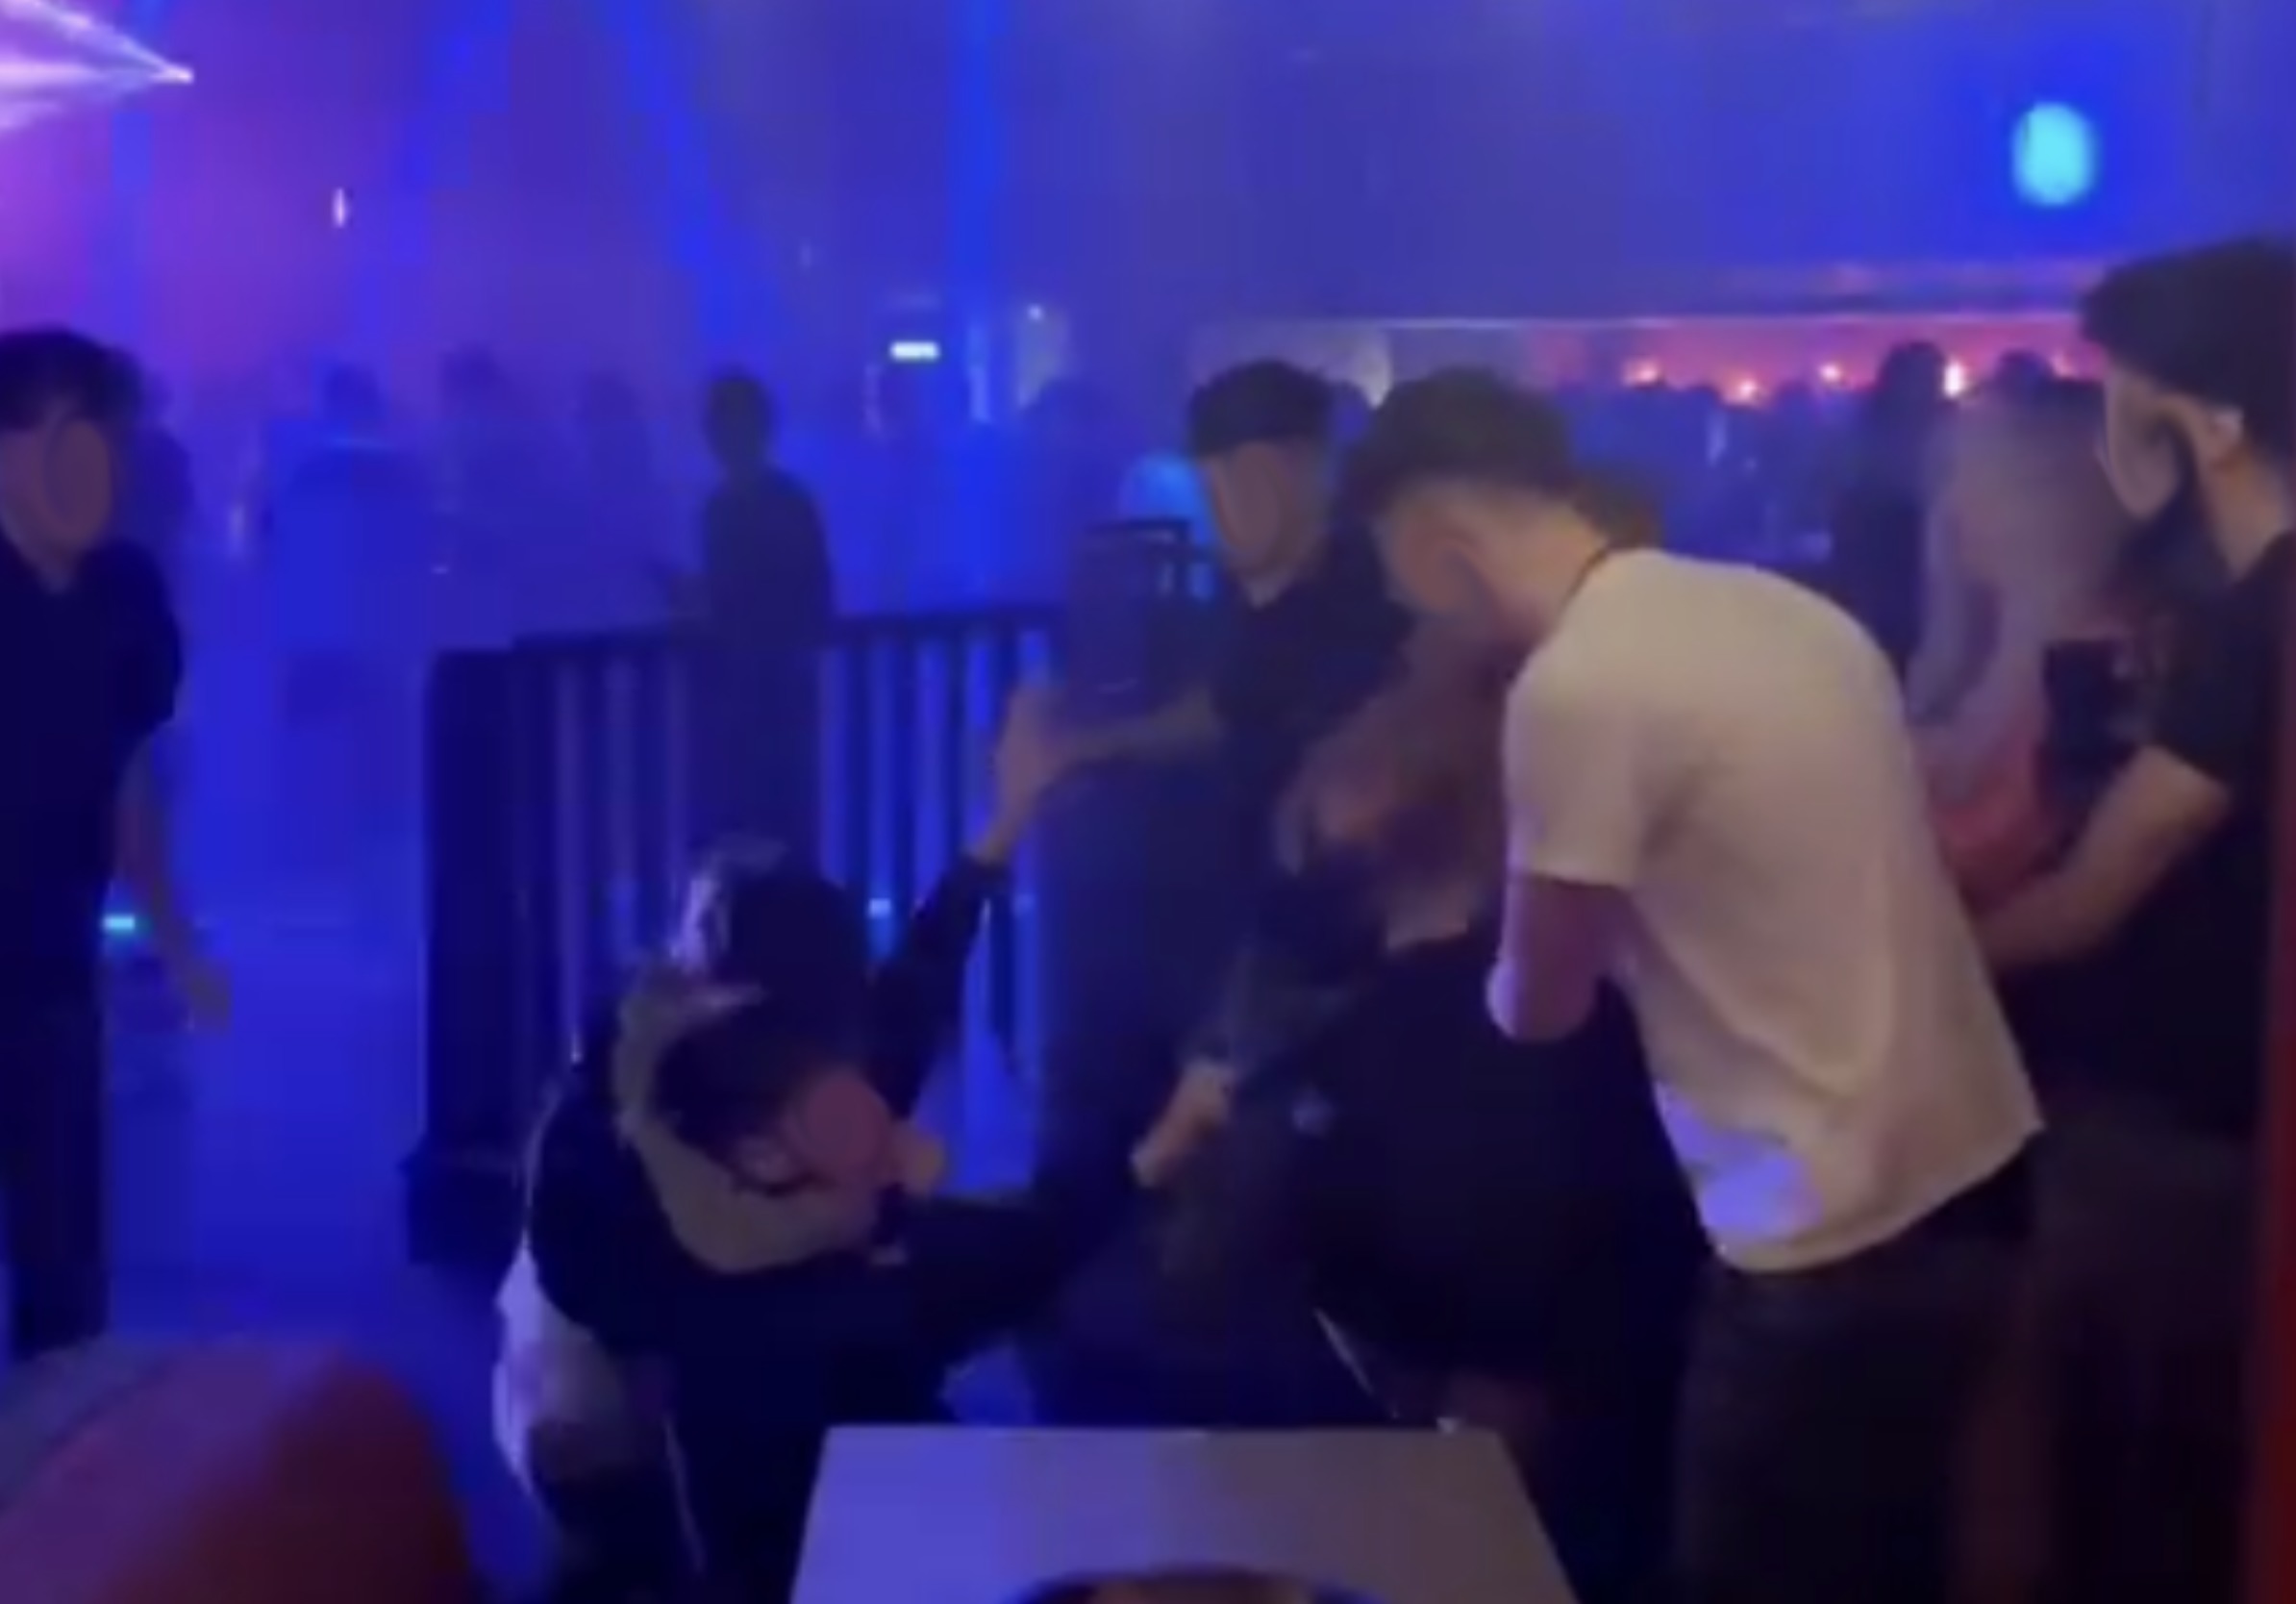 Screengrabs of footage in the club, as a victim was dragged to the floor